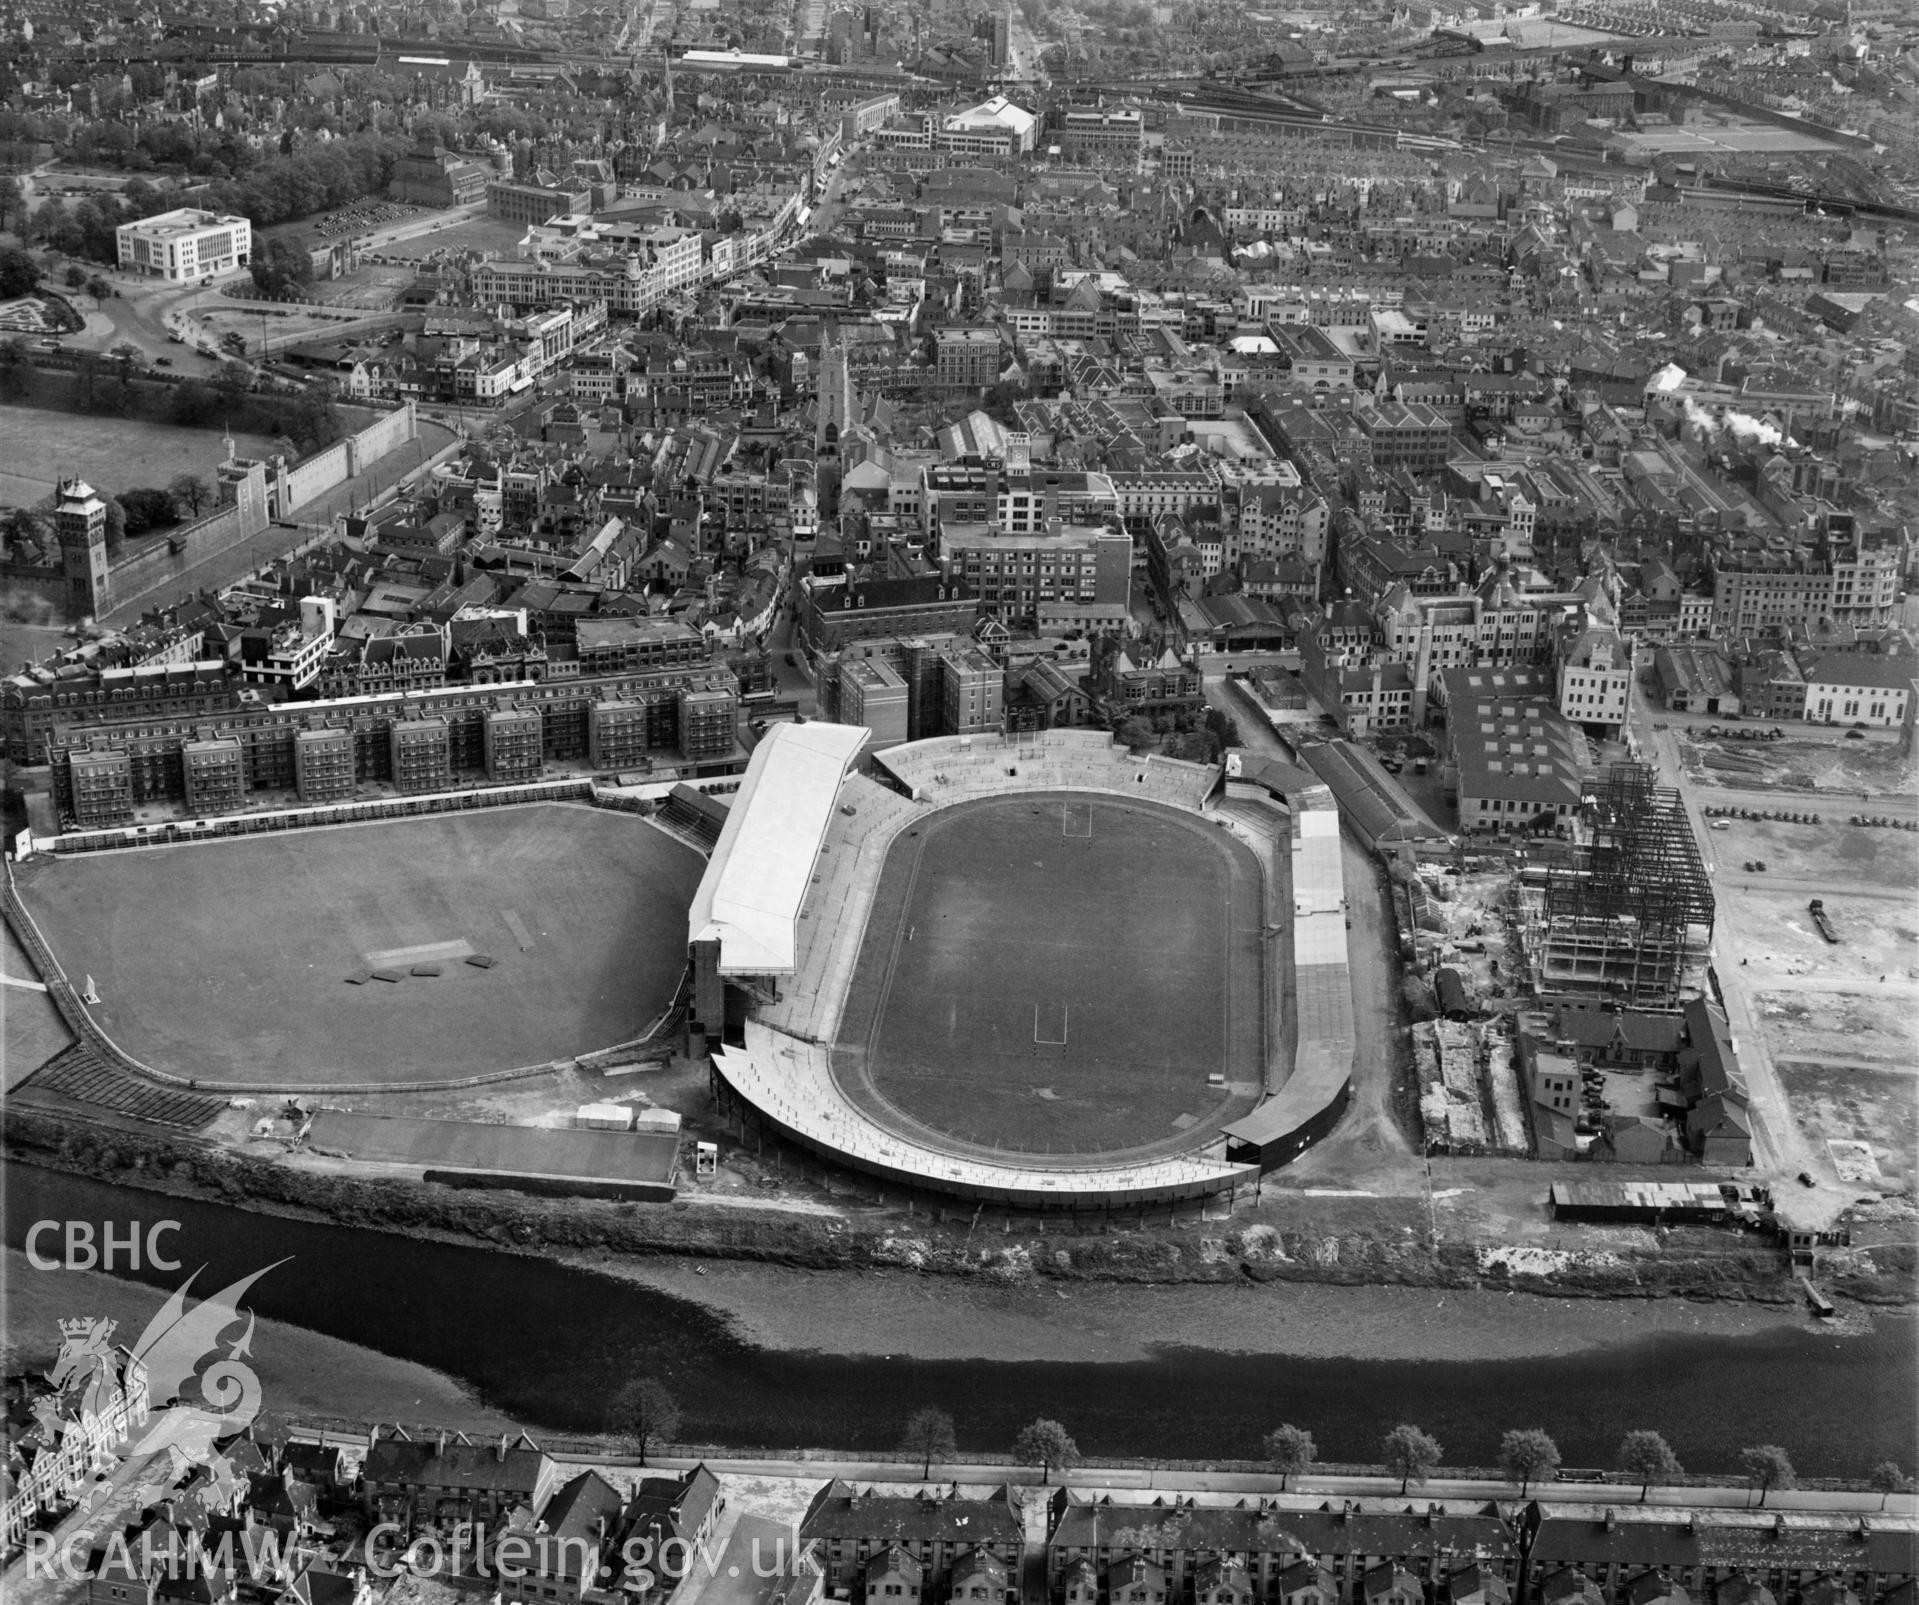 View of Cardiff showing the Arms Park rugby & cricket grounds